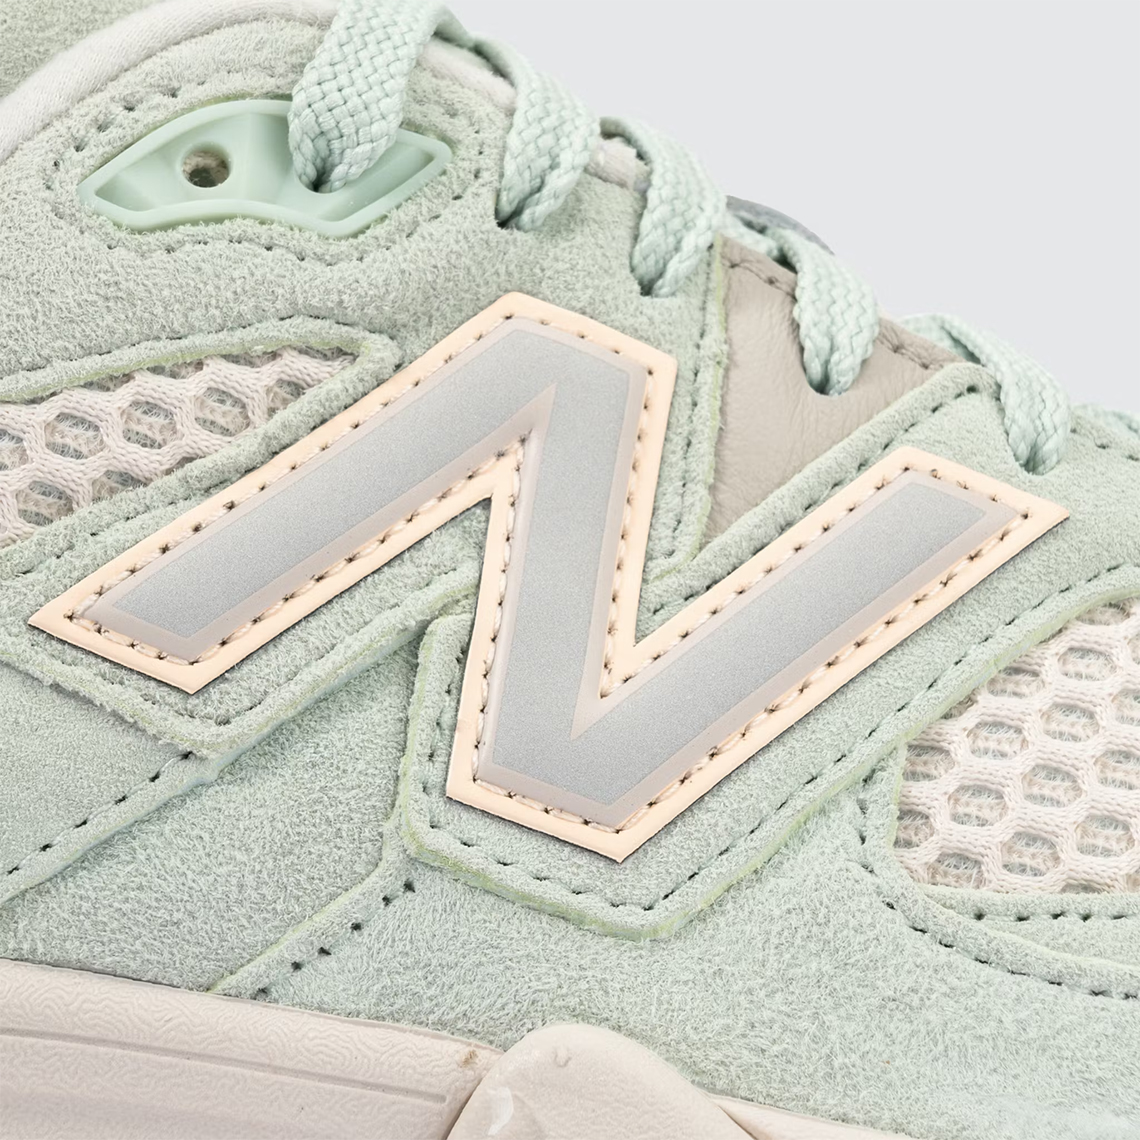 Whitaker Group New Balance 9060 Missing Pieces Release Info 11